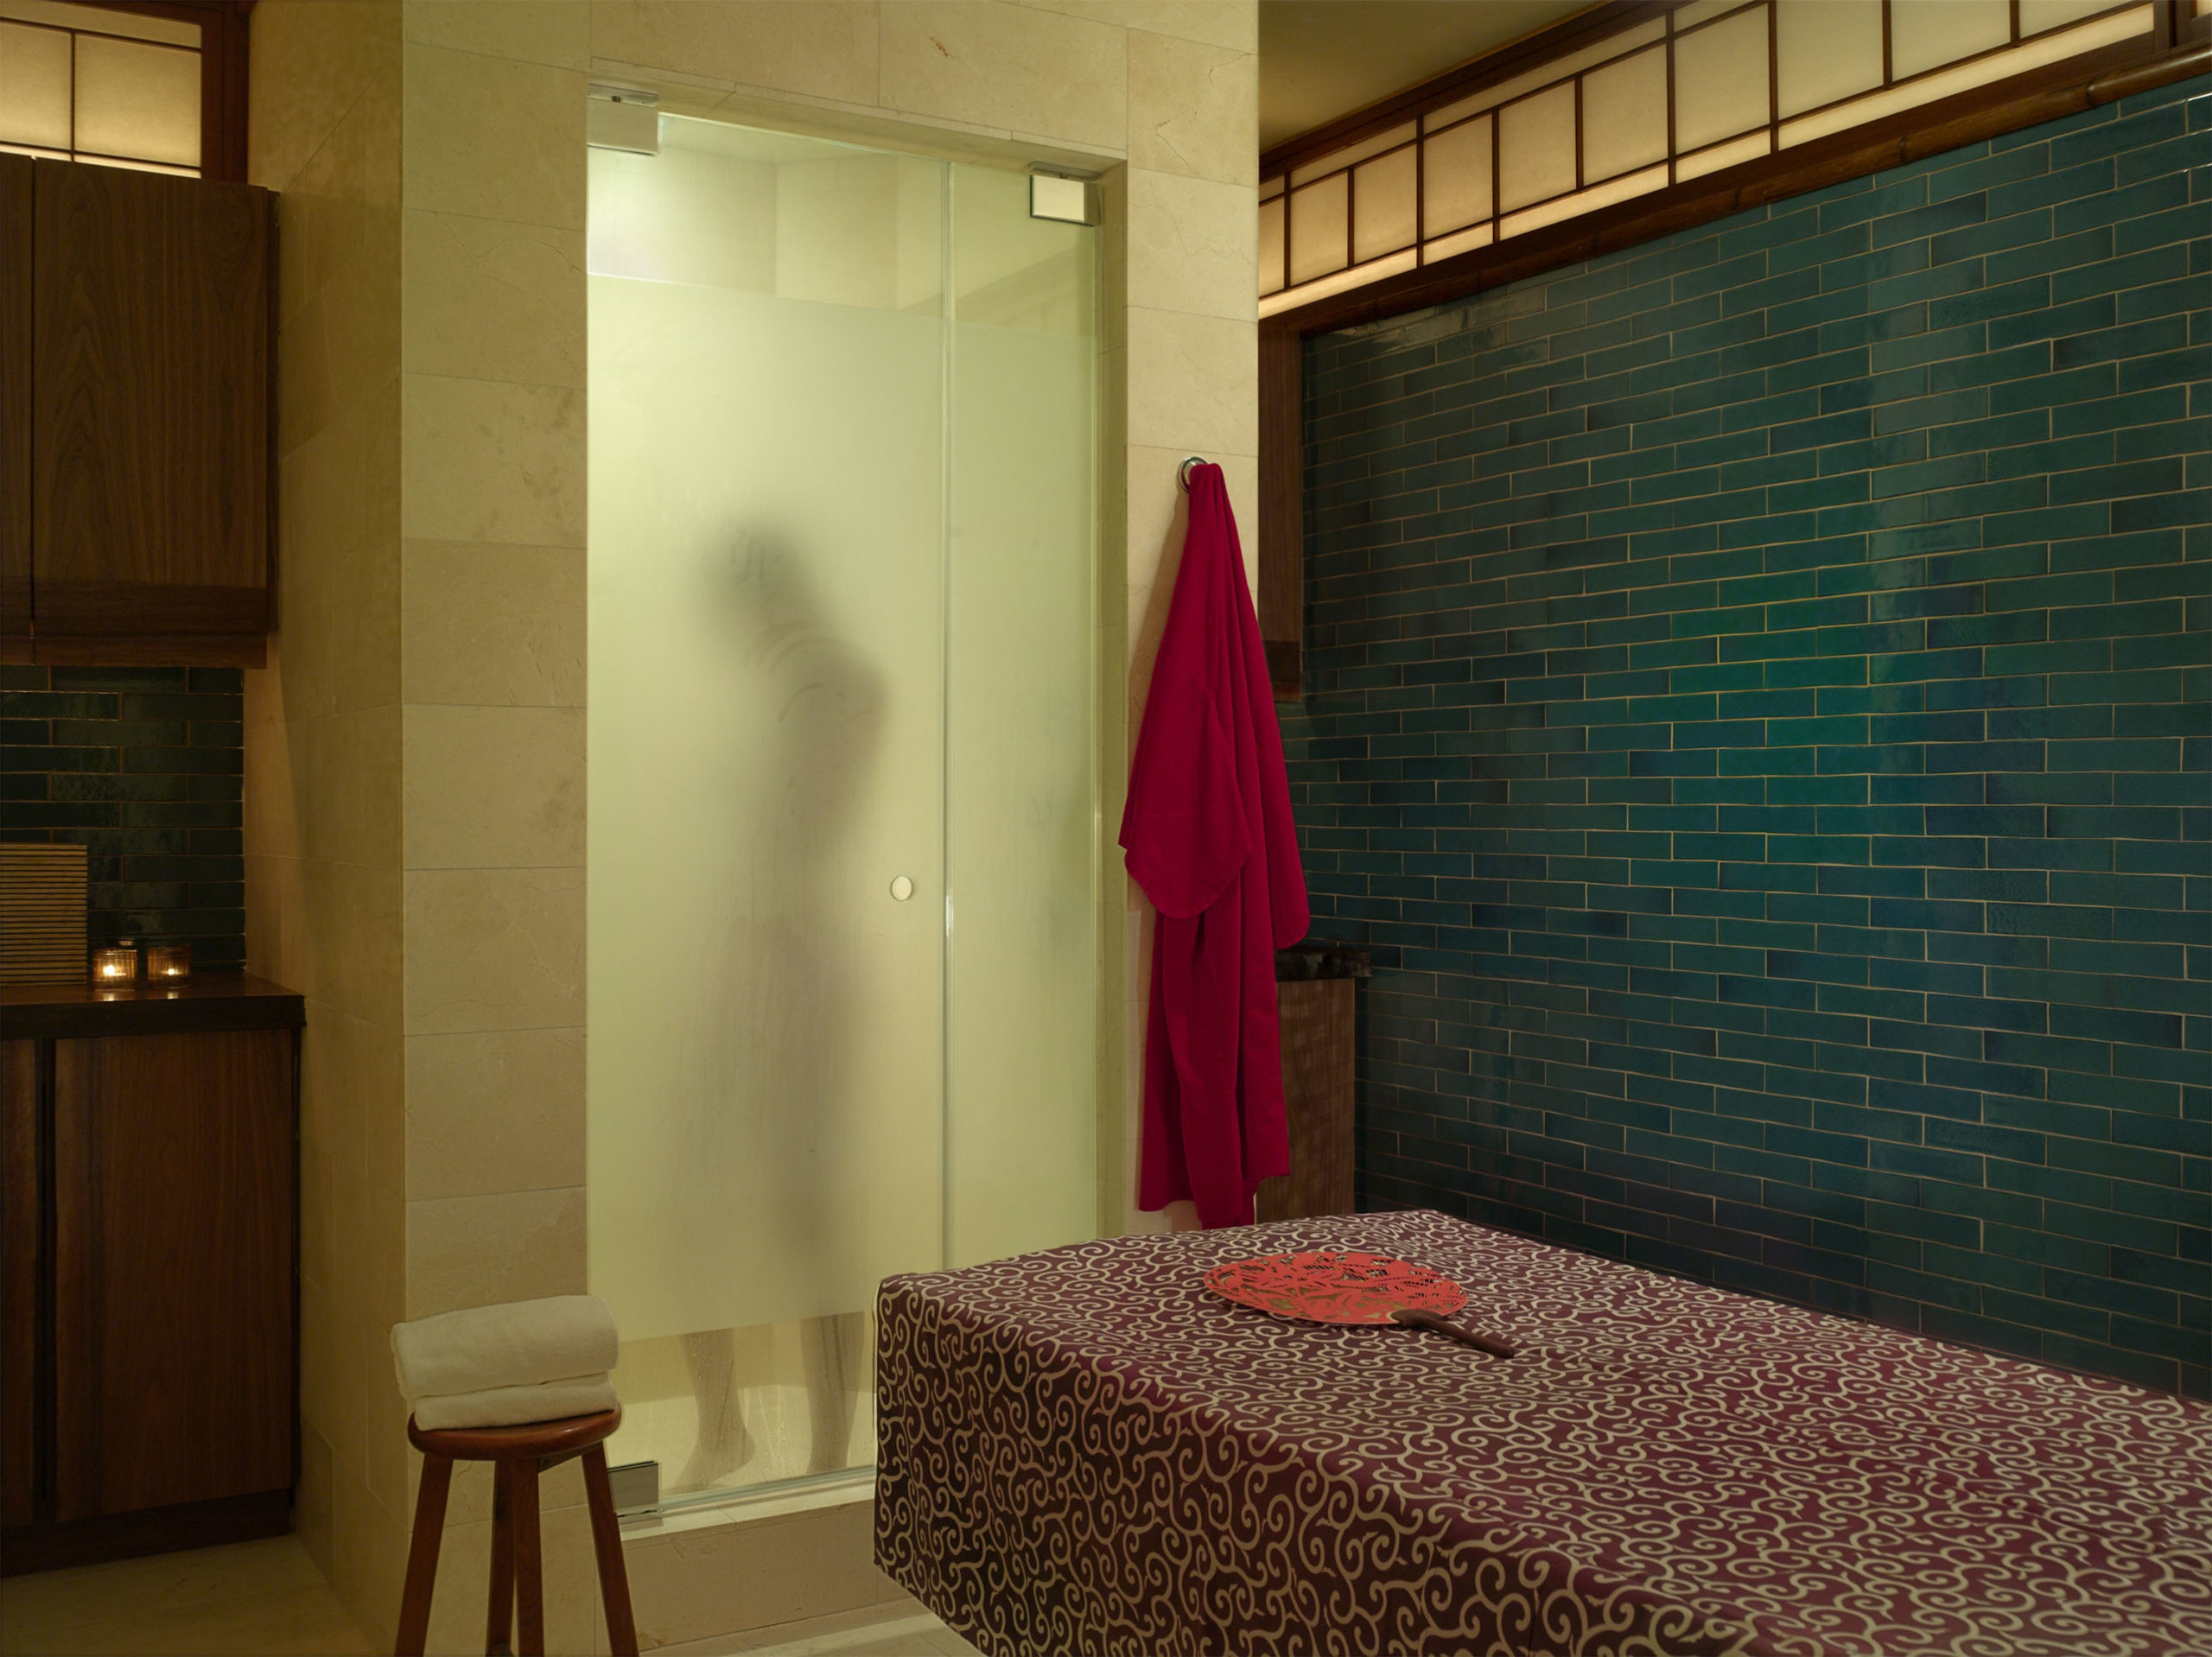 Shibui Spa: Best Downtown NYC Spa, Wellness Hotel, Spa Gift Certificate | The Greenwich Hotel